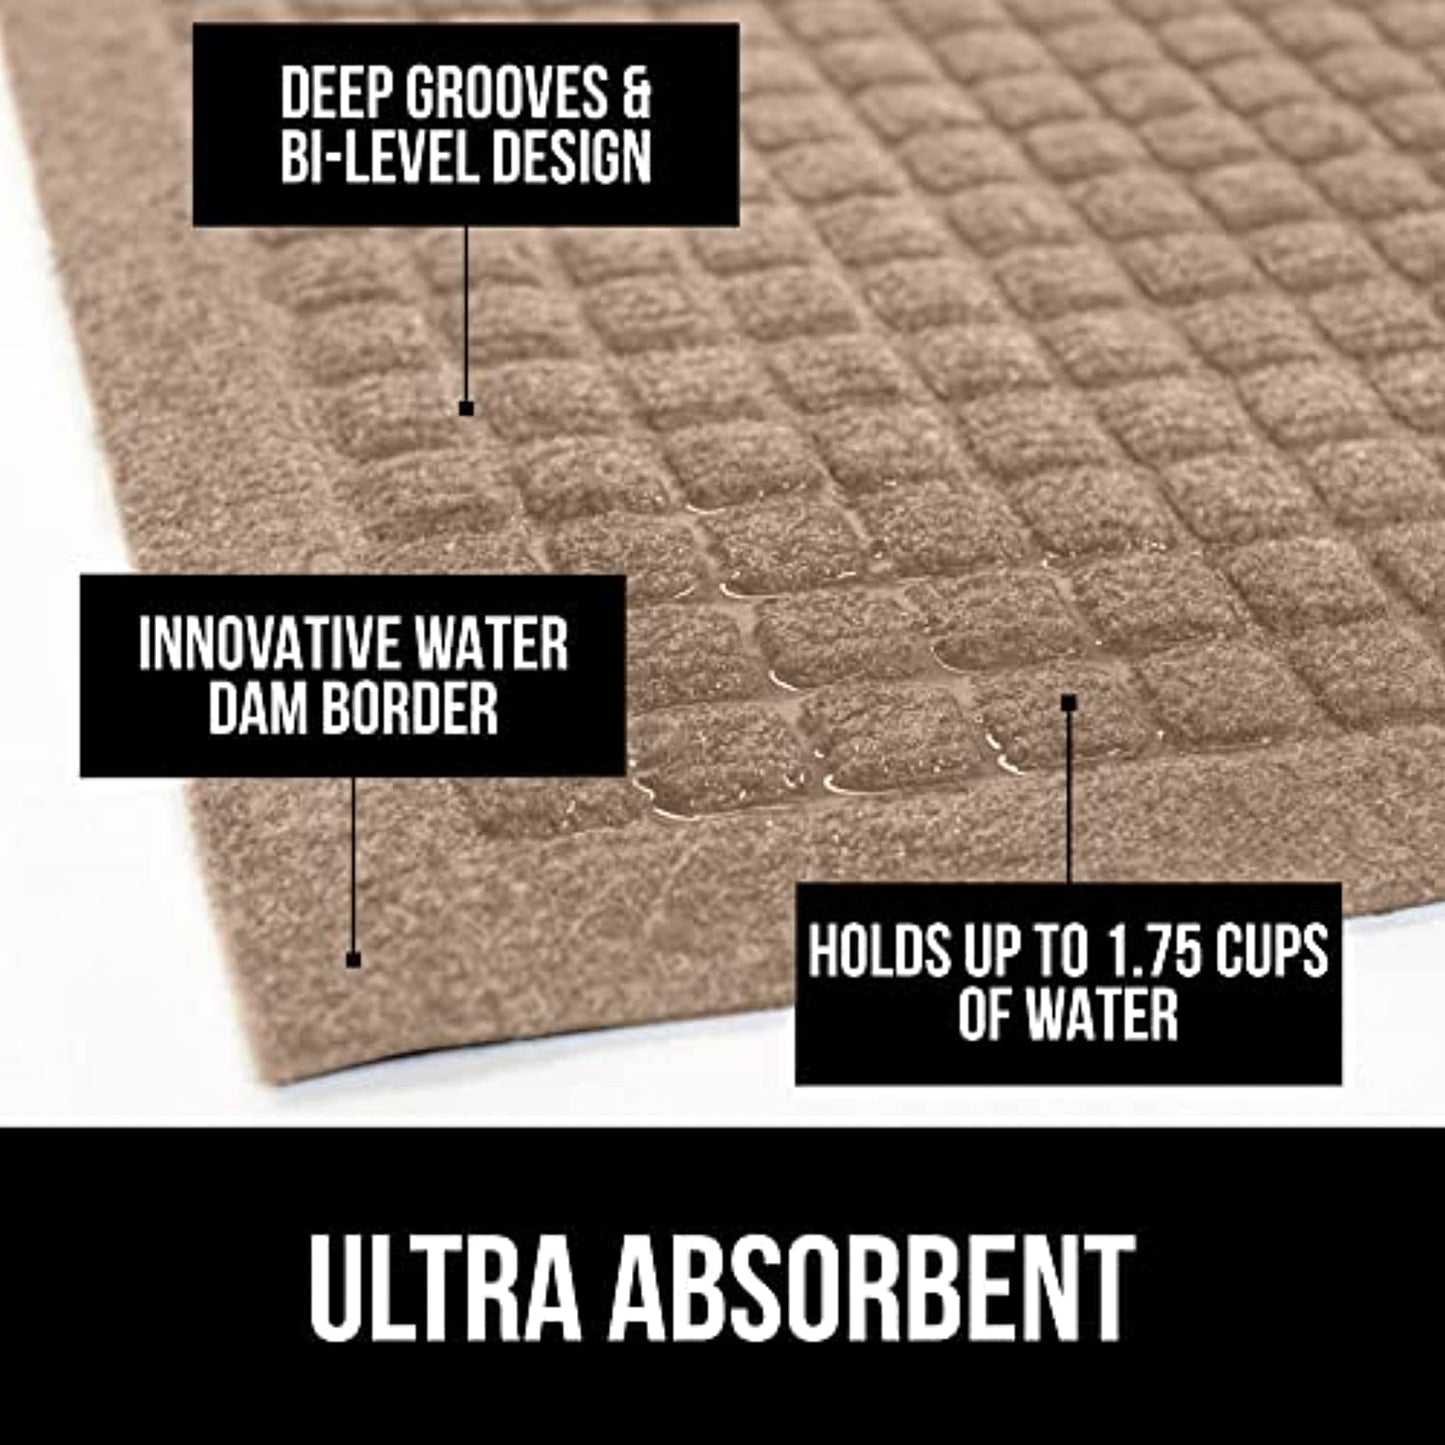 Gorilla Grip All Weather Absorbent Doormat  Dries Quickly  47x35  Absorbs Up to 6 Cups of Water  Captures Dirt  Stain and Fade Resistant  Durable Backing  Indoor Outdoor Mats  Boot Scraper  Coffee